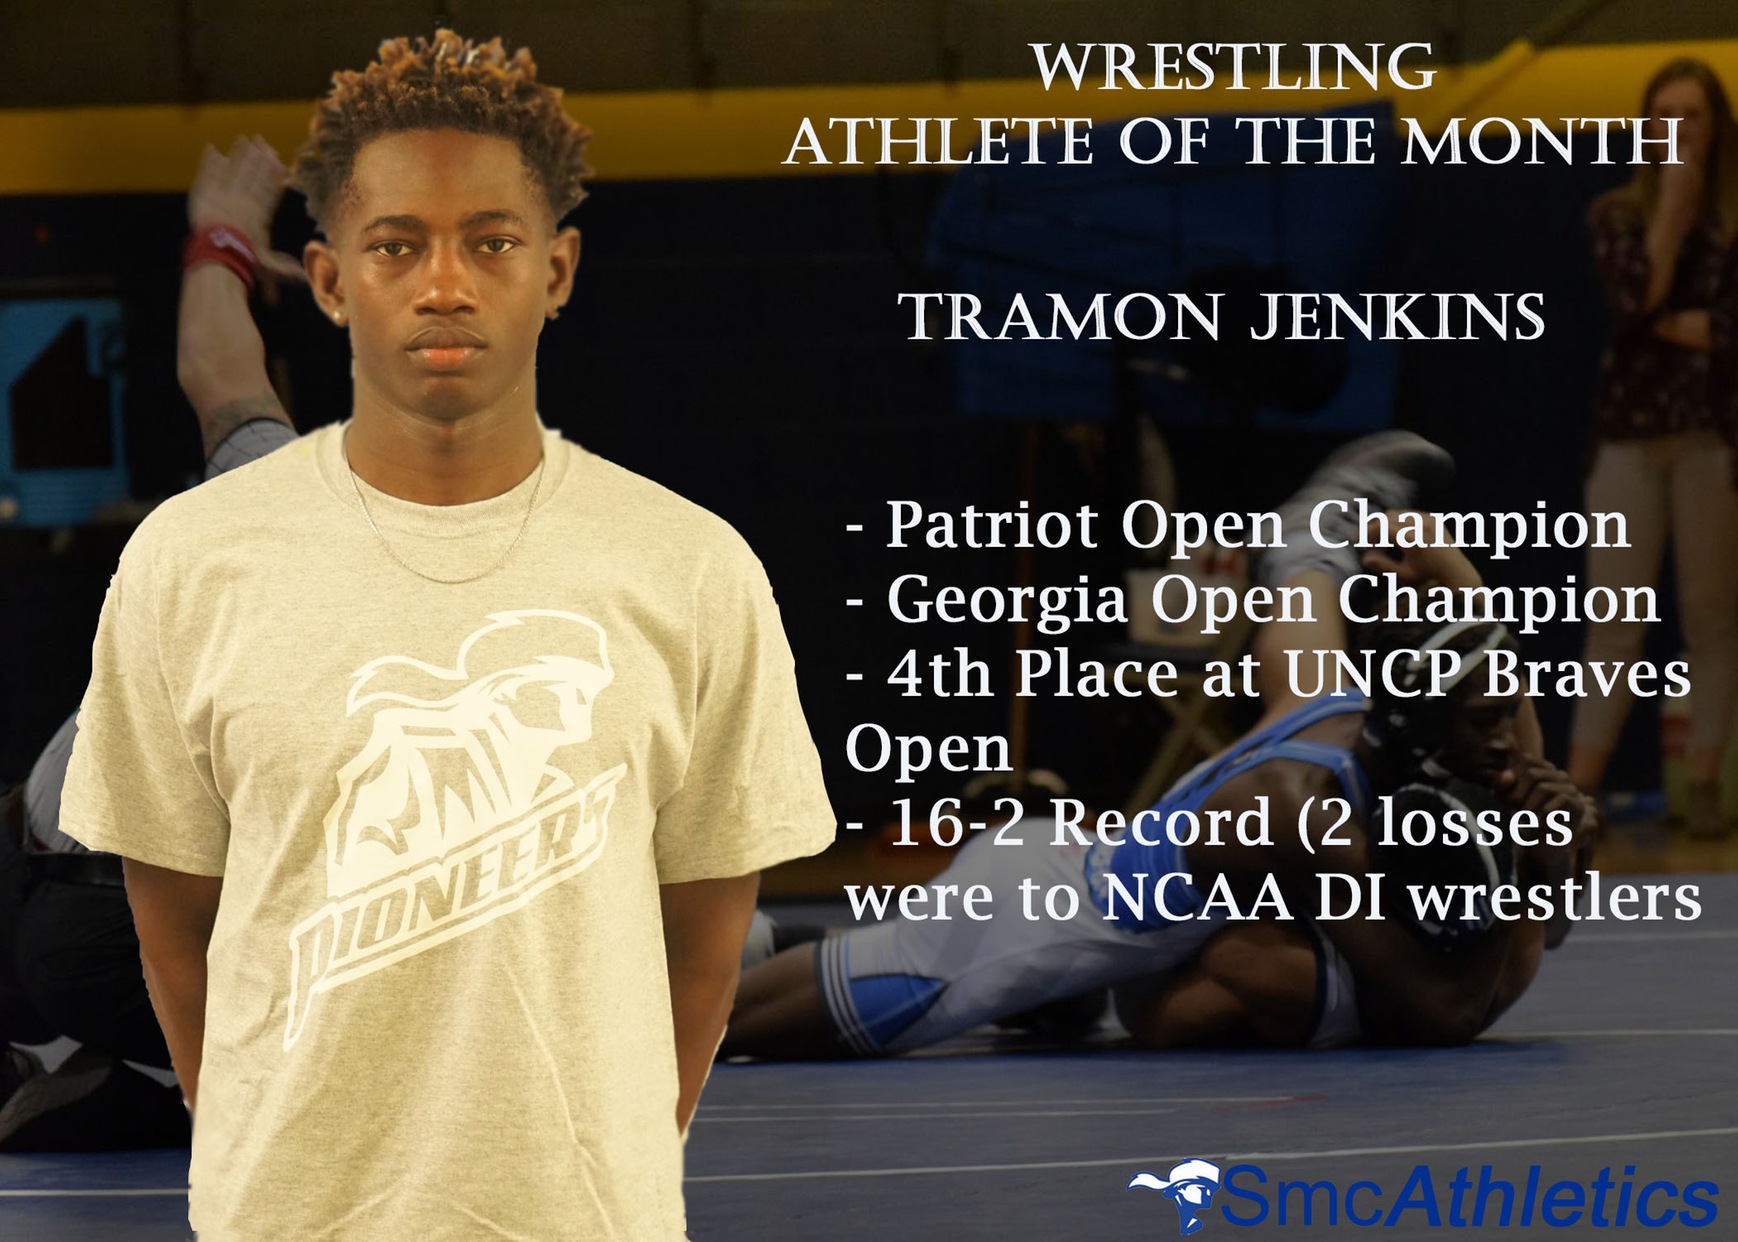 Wrestling Athlete of the Month